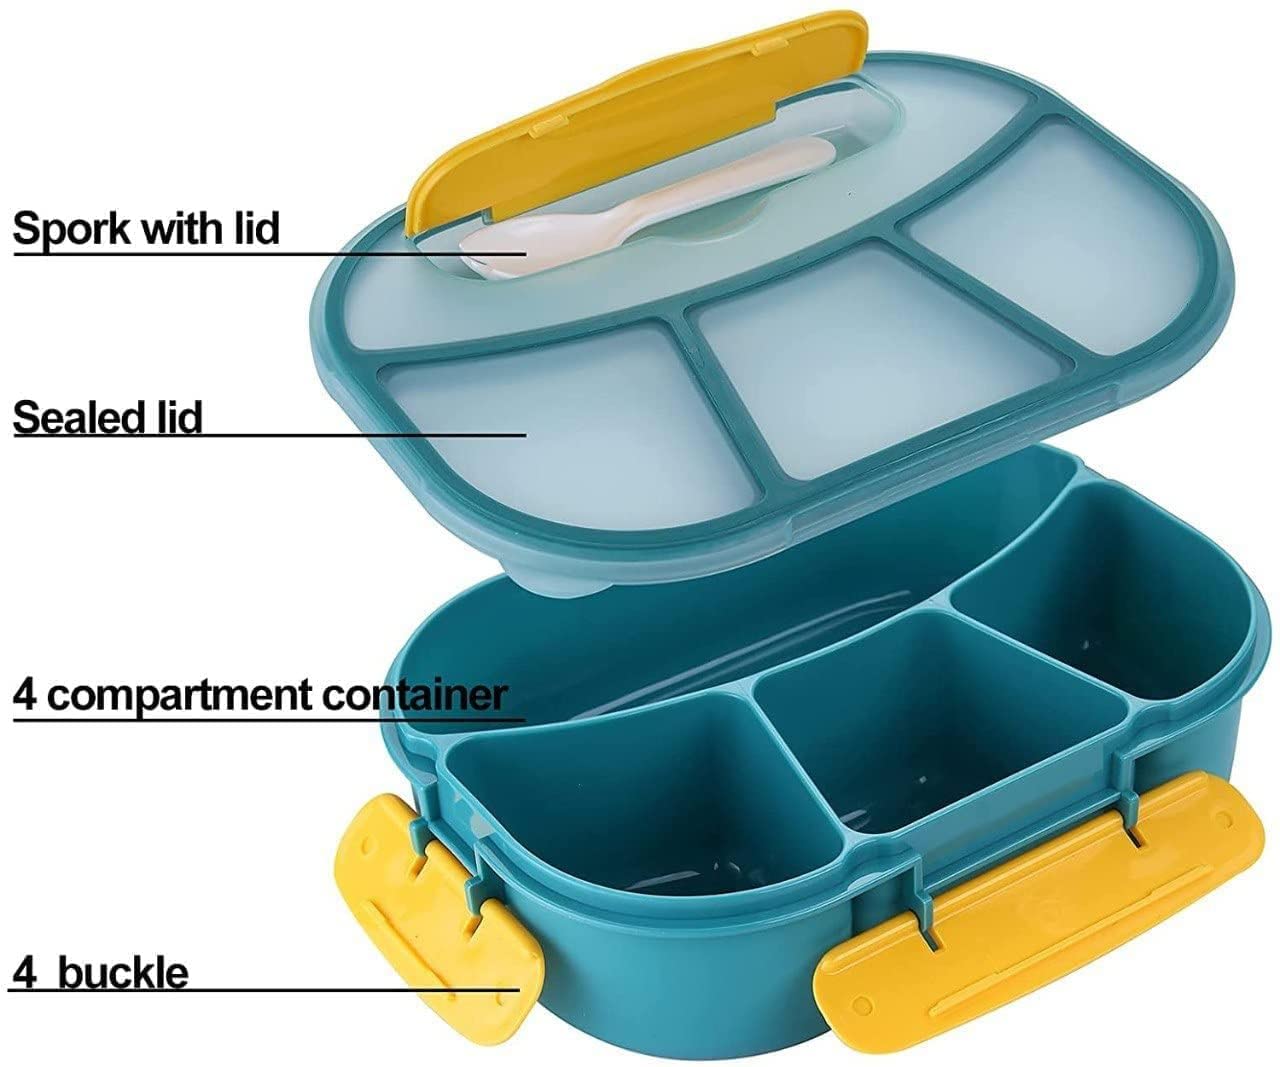 Tiffin Box, Bento Lunch Box With Bright Coloured, Smooth Finish, Large Size Compartmented